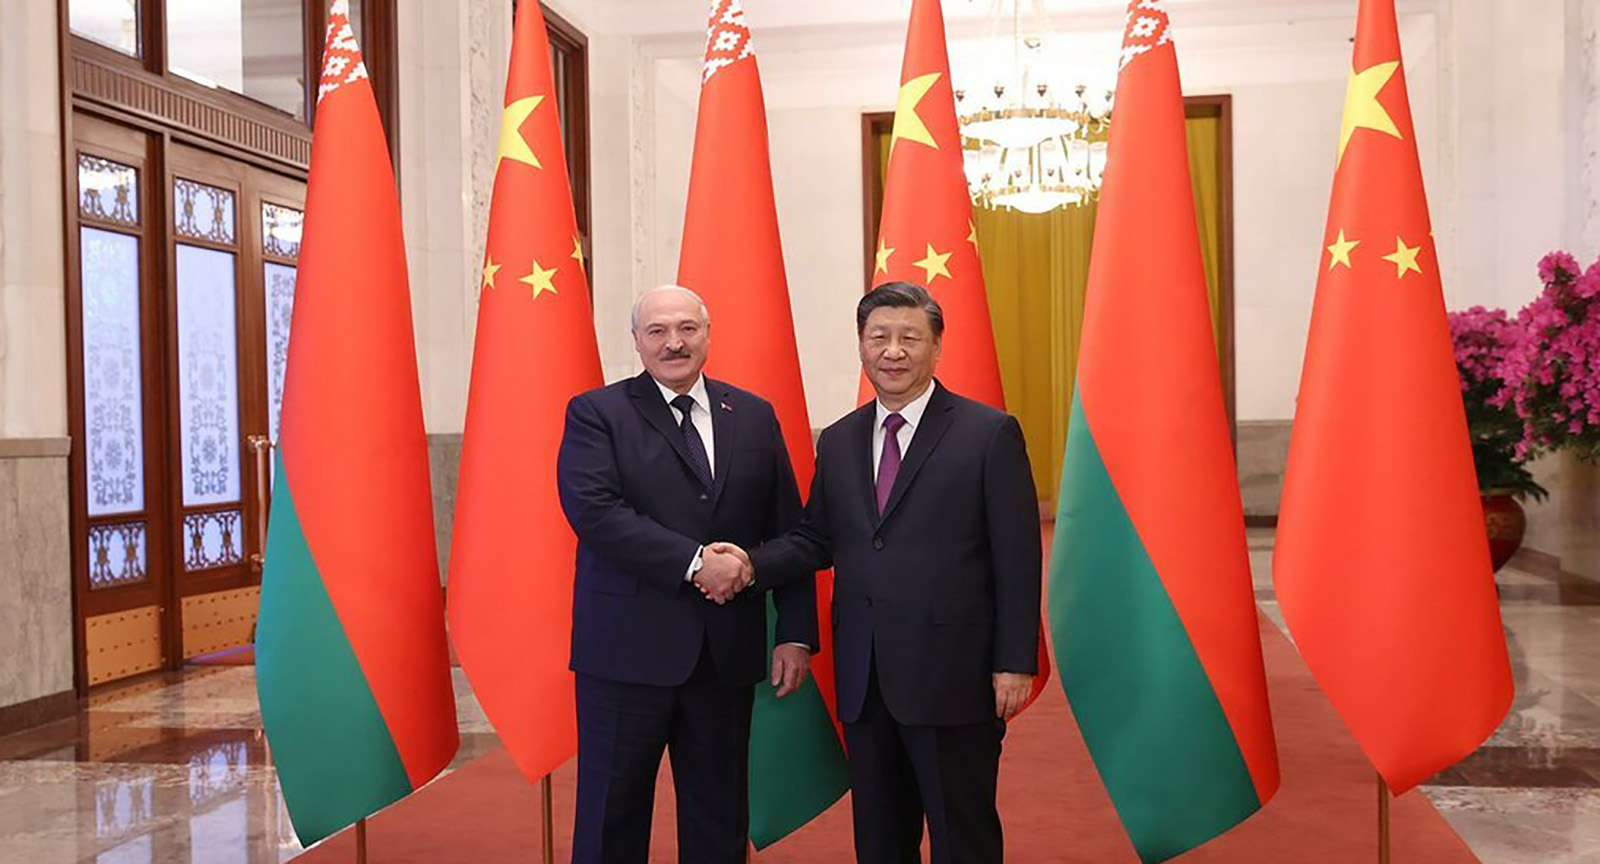 Belarus’ President Alexander Lukashenko, left, meets with Chinese counterpart Xi Jinping in Beijing, China, on March 1.